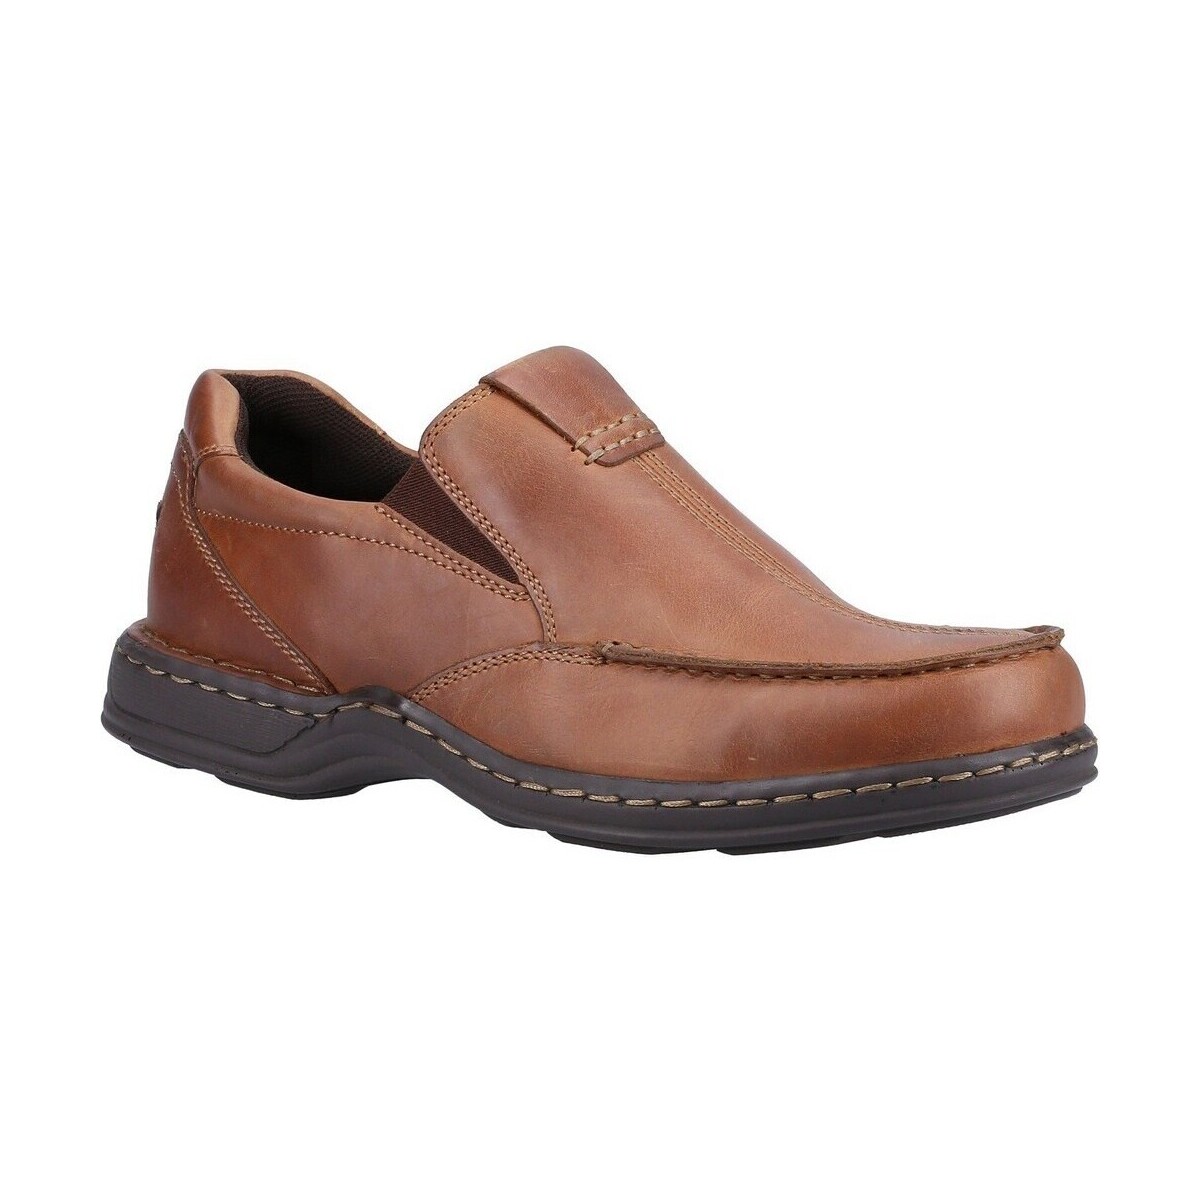 Chaussures Homme Mocassins Hush puppies Ronnie Multicolore